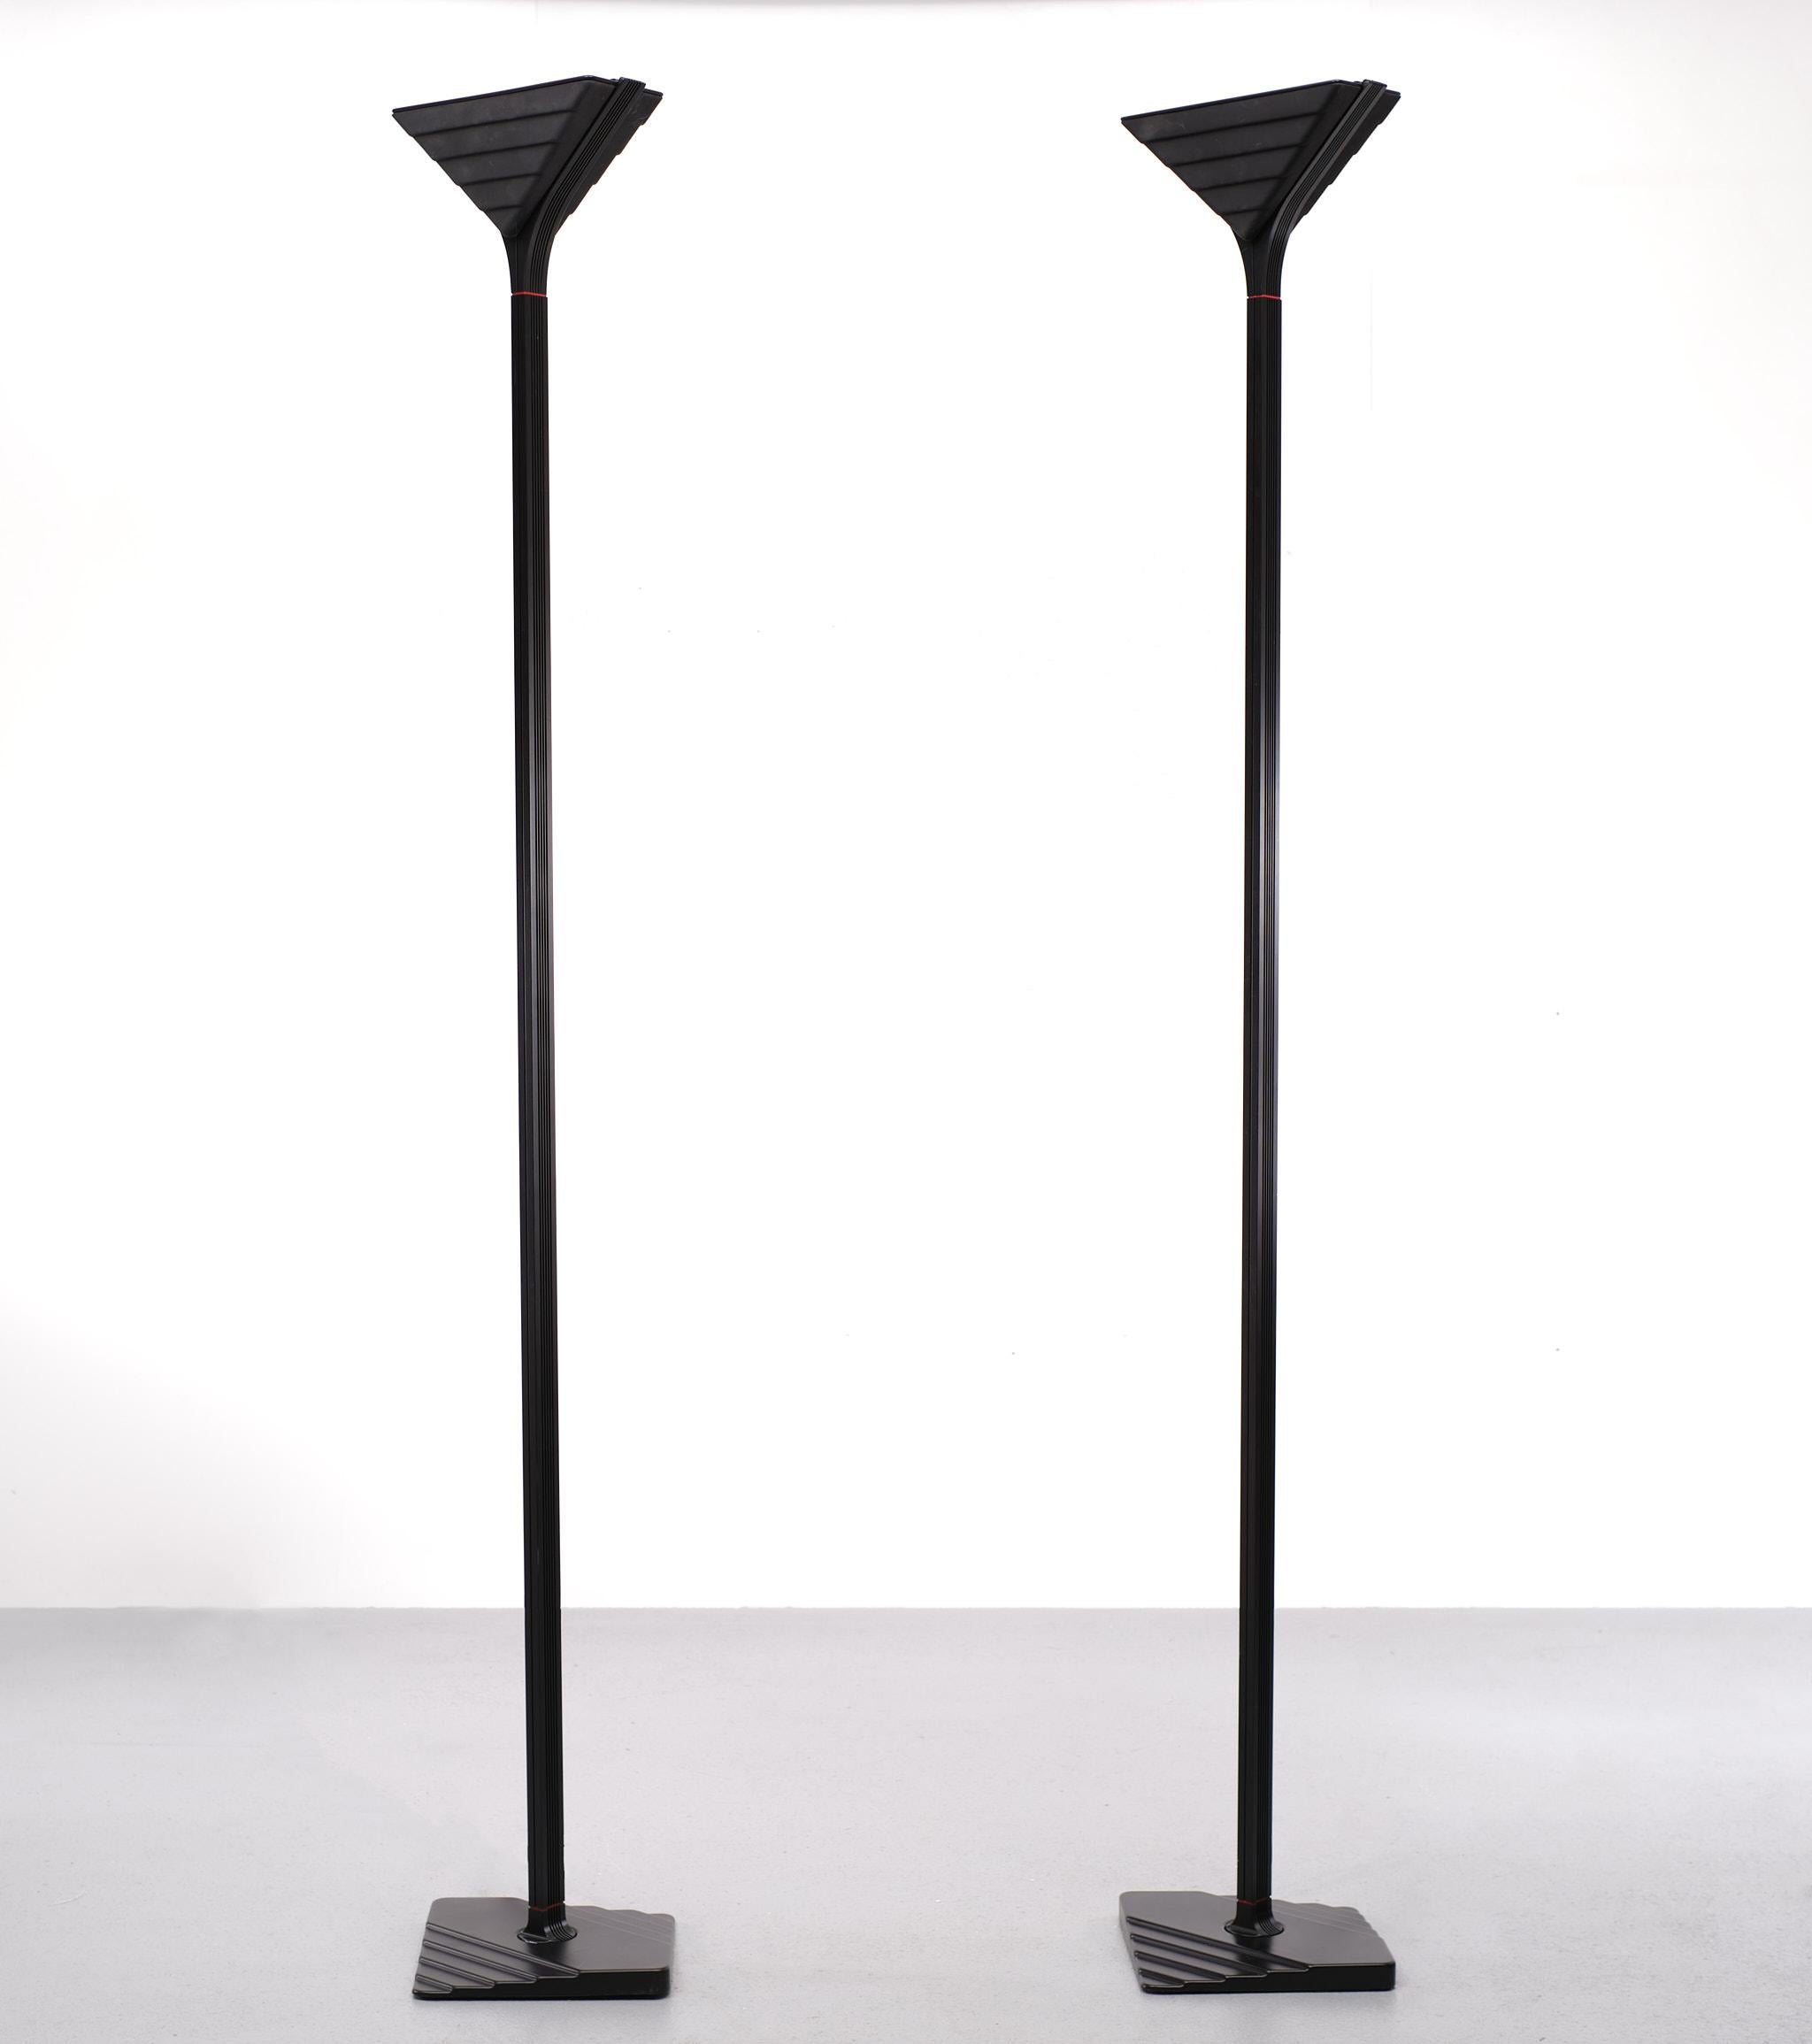 Set Very nice identical Halogen floor lamps. Black Aluminum upright, comes with 
a Black Glass triangle shade. Straight out off Star Trek. Gives a warm Purple 
light when lid. Beautiful working dimmer. New old stock. So very good condition.
 